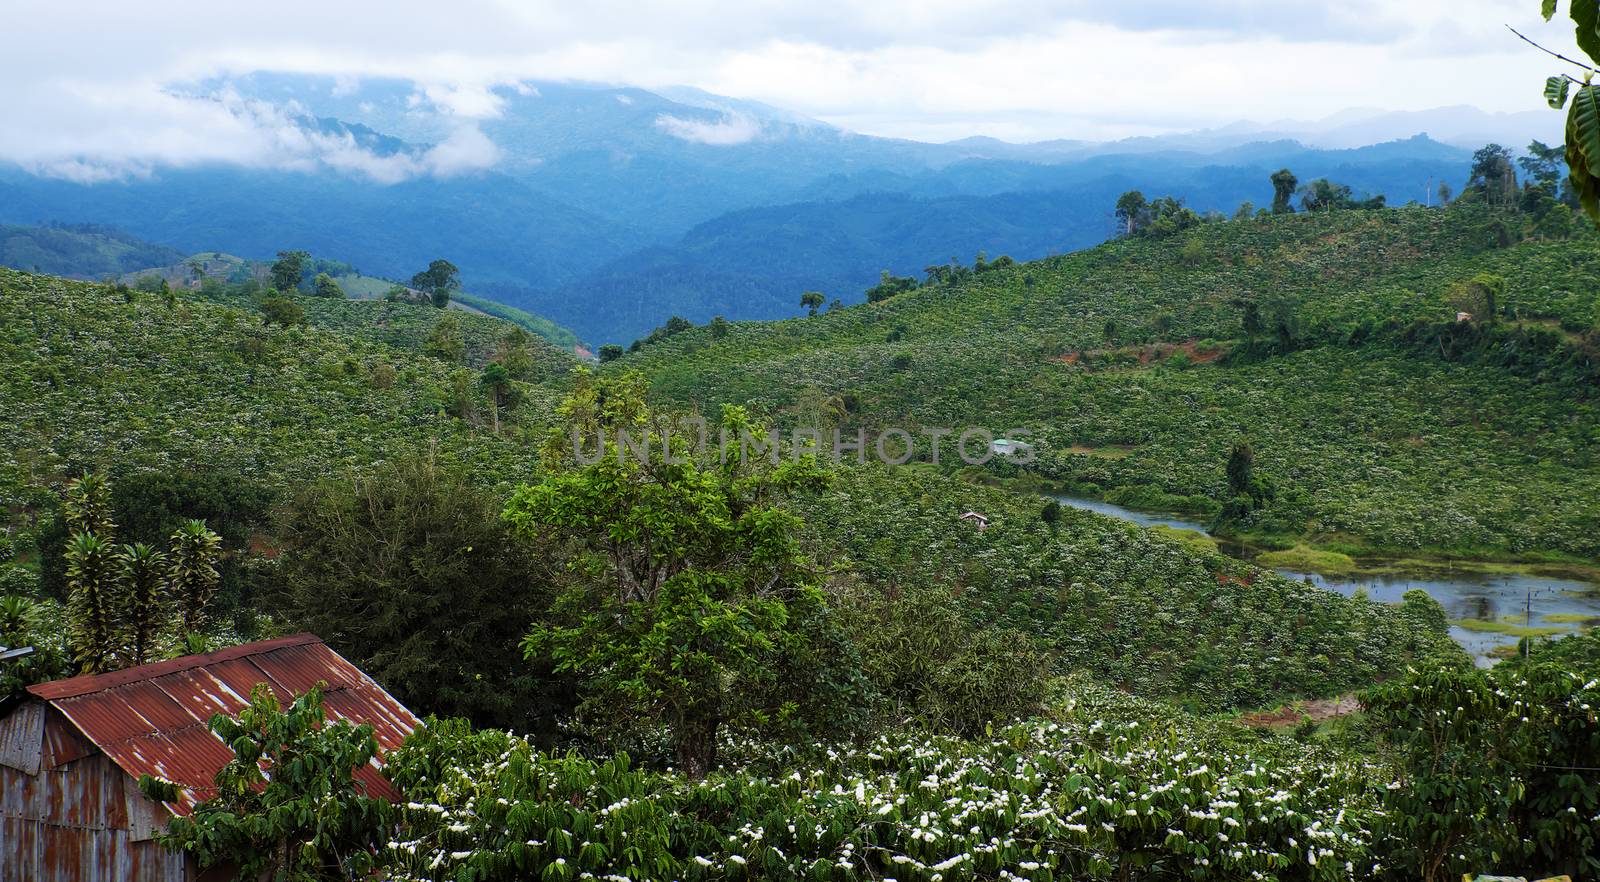 wide coffee plantation in blossoms season by xuanhuongho